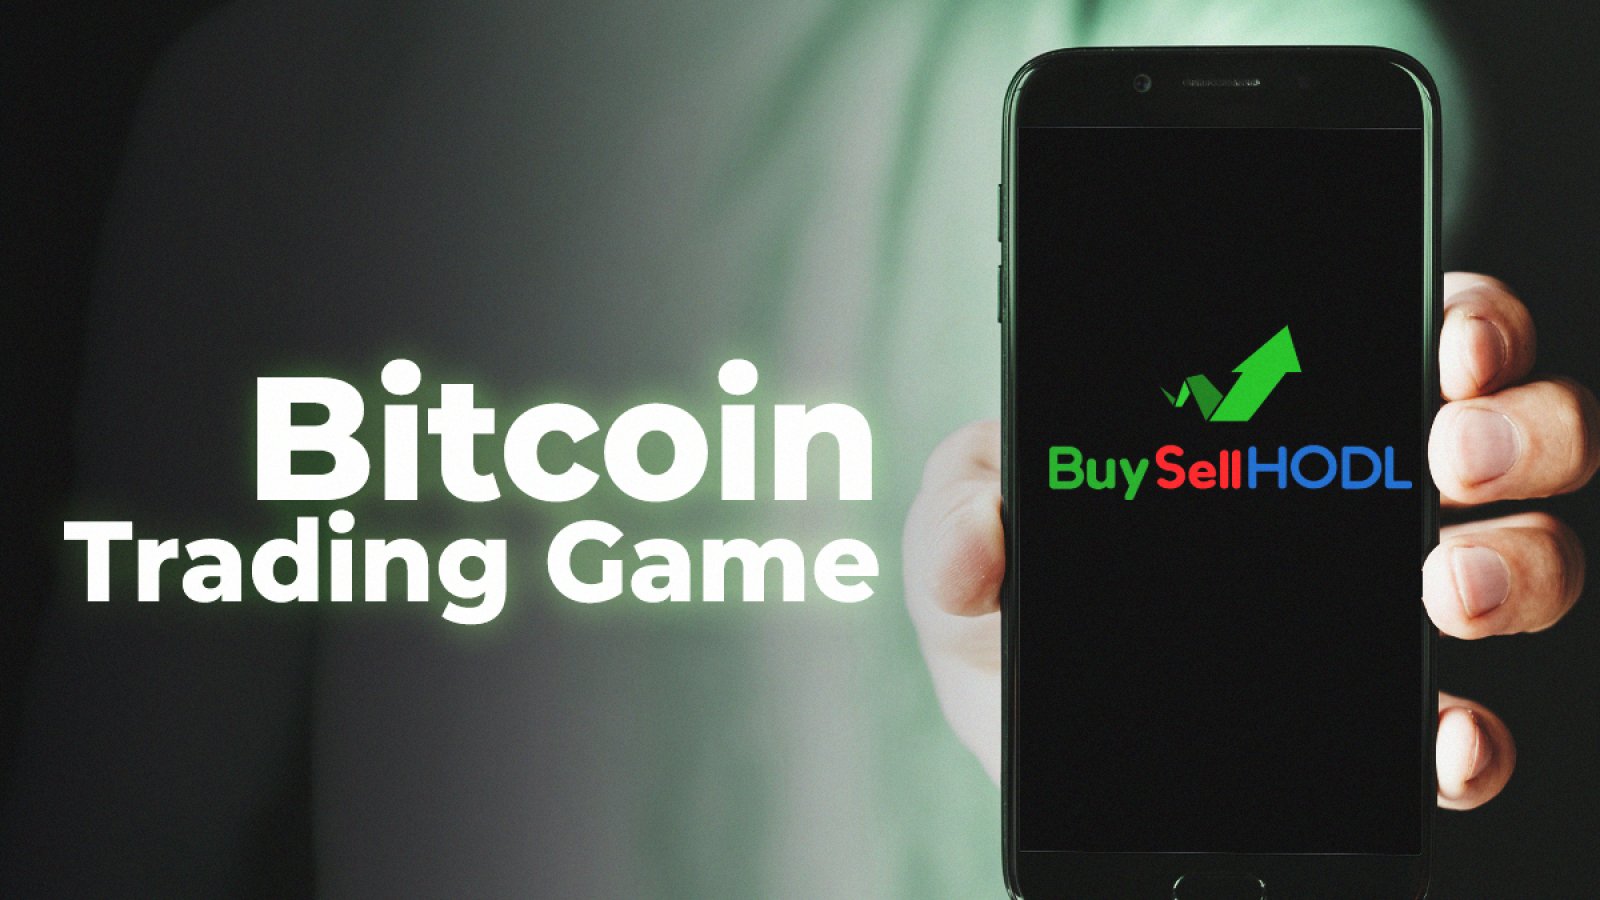 BuySellHodl Crypto App Launches Bitcoin Trading Game